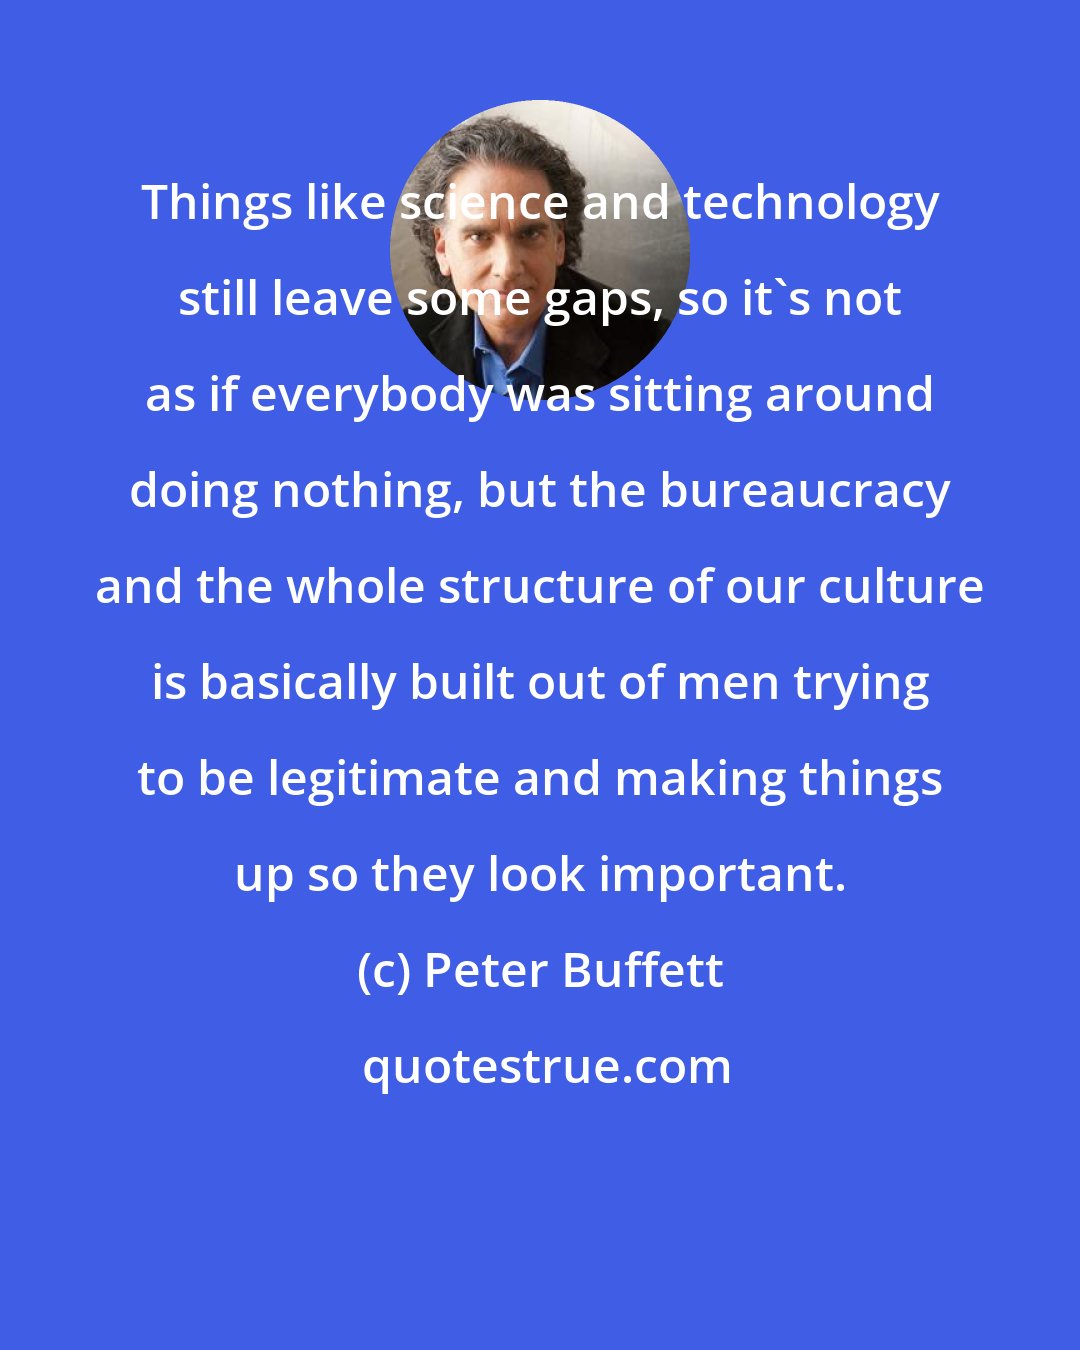 Peter Buffett: Things like science and technology still leave some gaps, so it's not as if everybody was sitting around doing nothing, but the bureaucracy and the whole structure of our culture is basically built out of men trying to be legitimate and making things up so they look important.